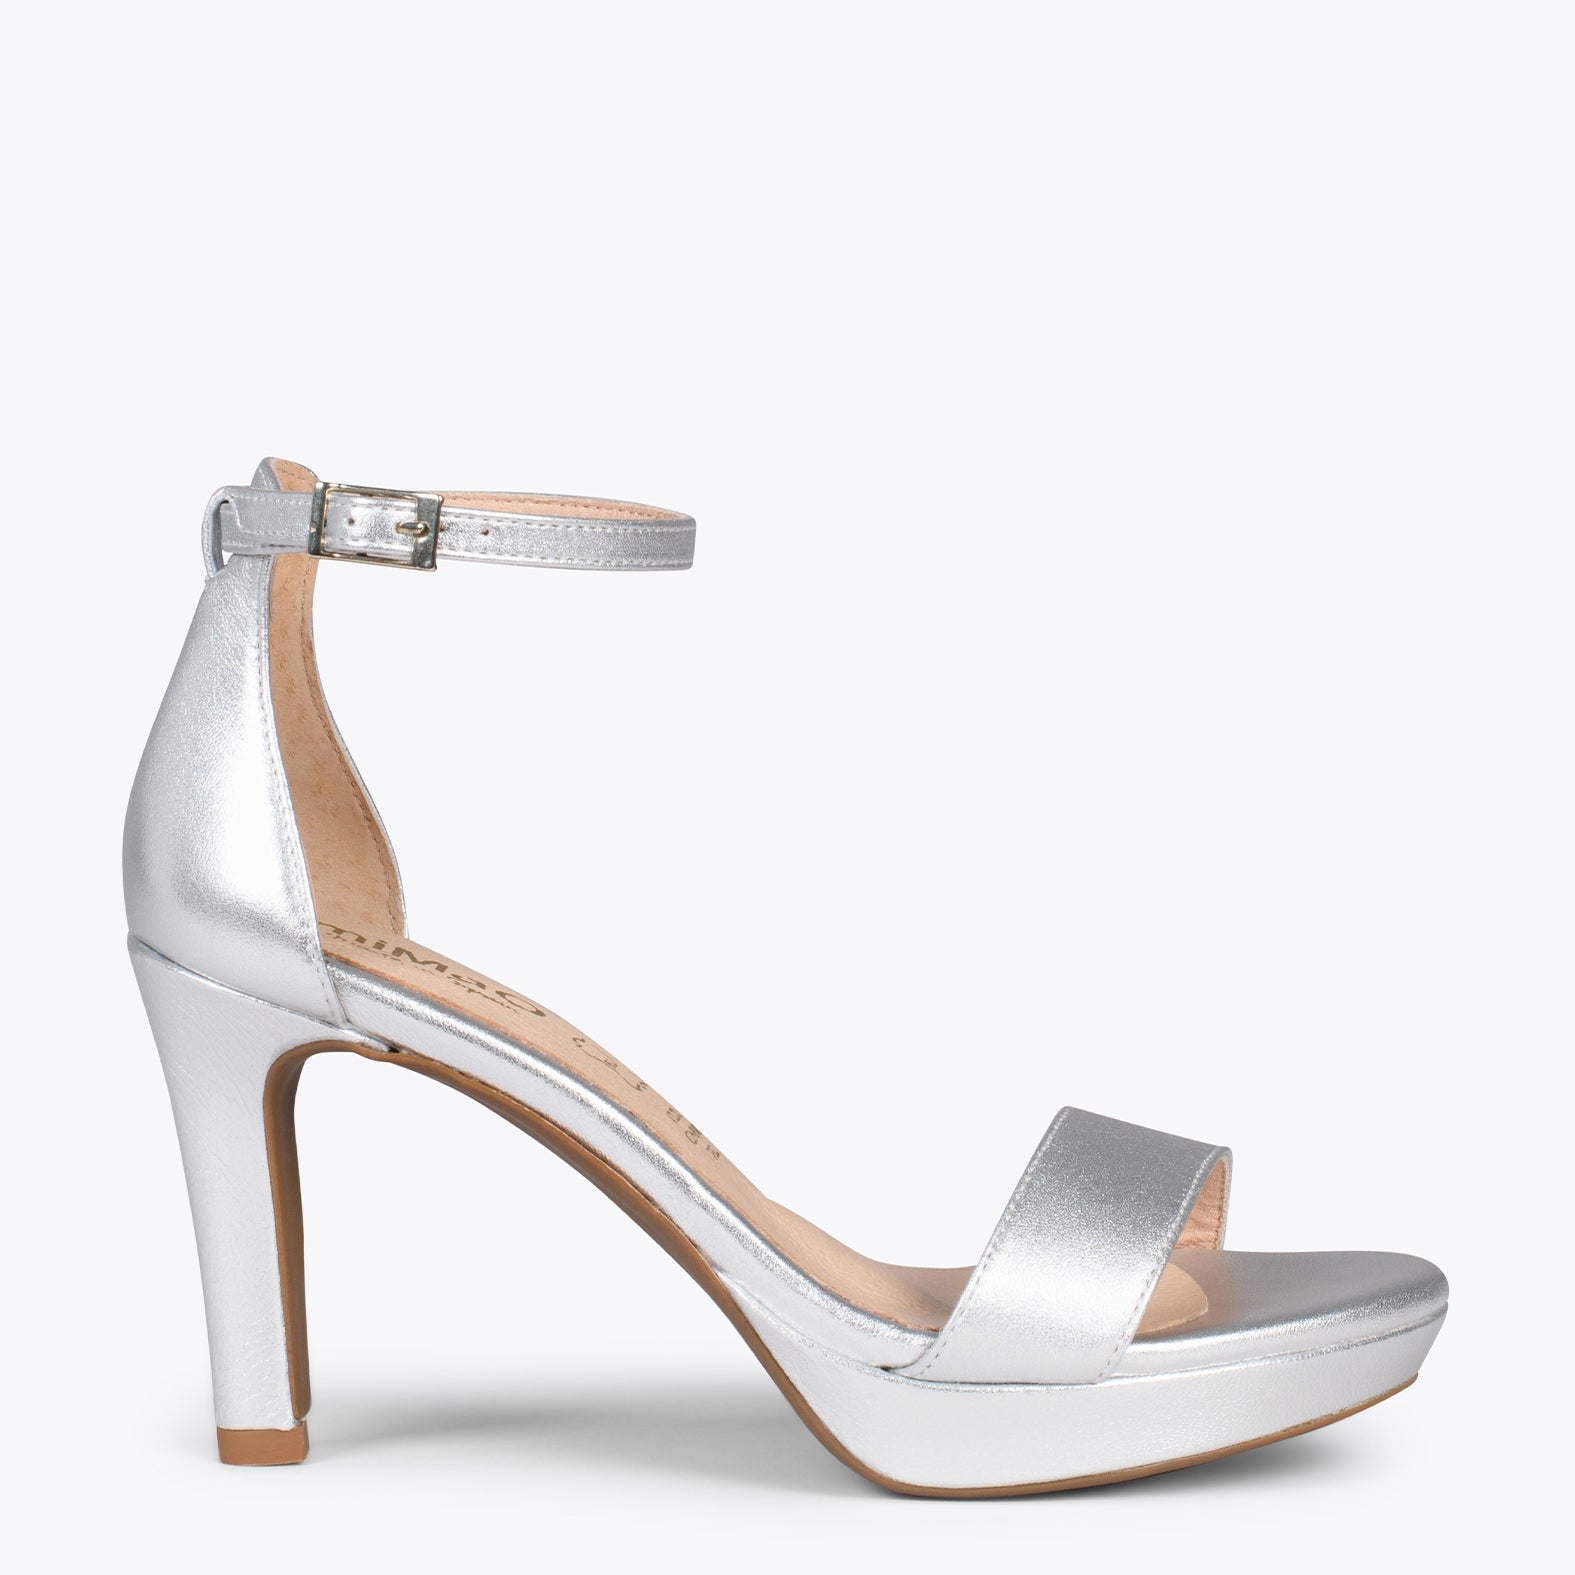 PARTY – SILVER high heel sandals with platform